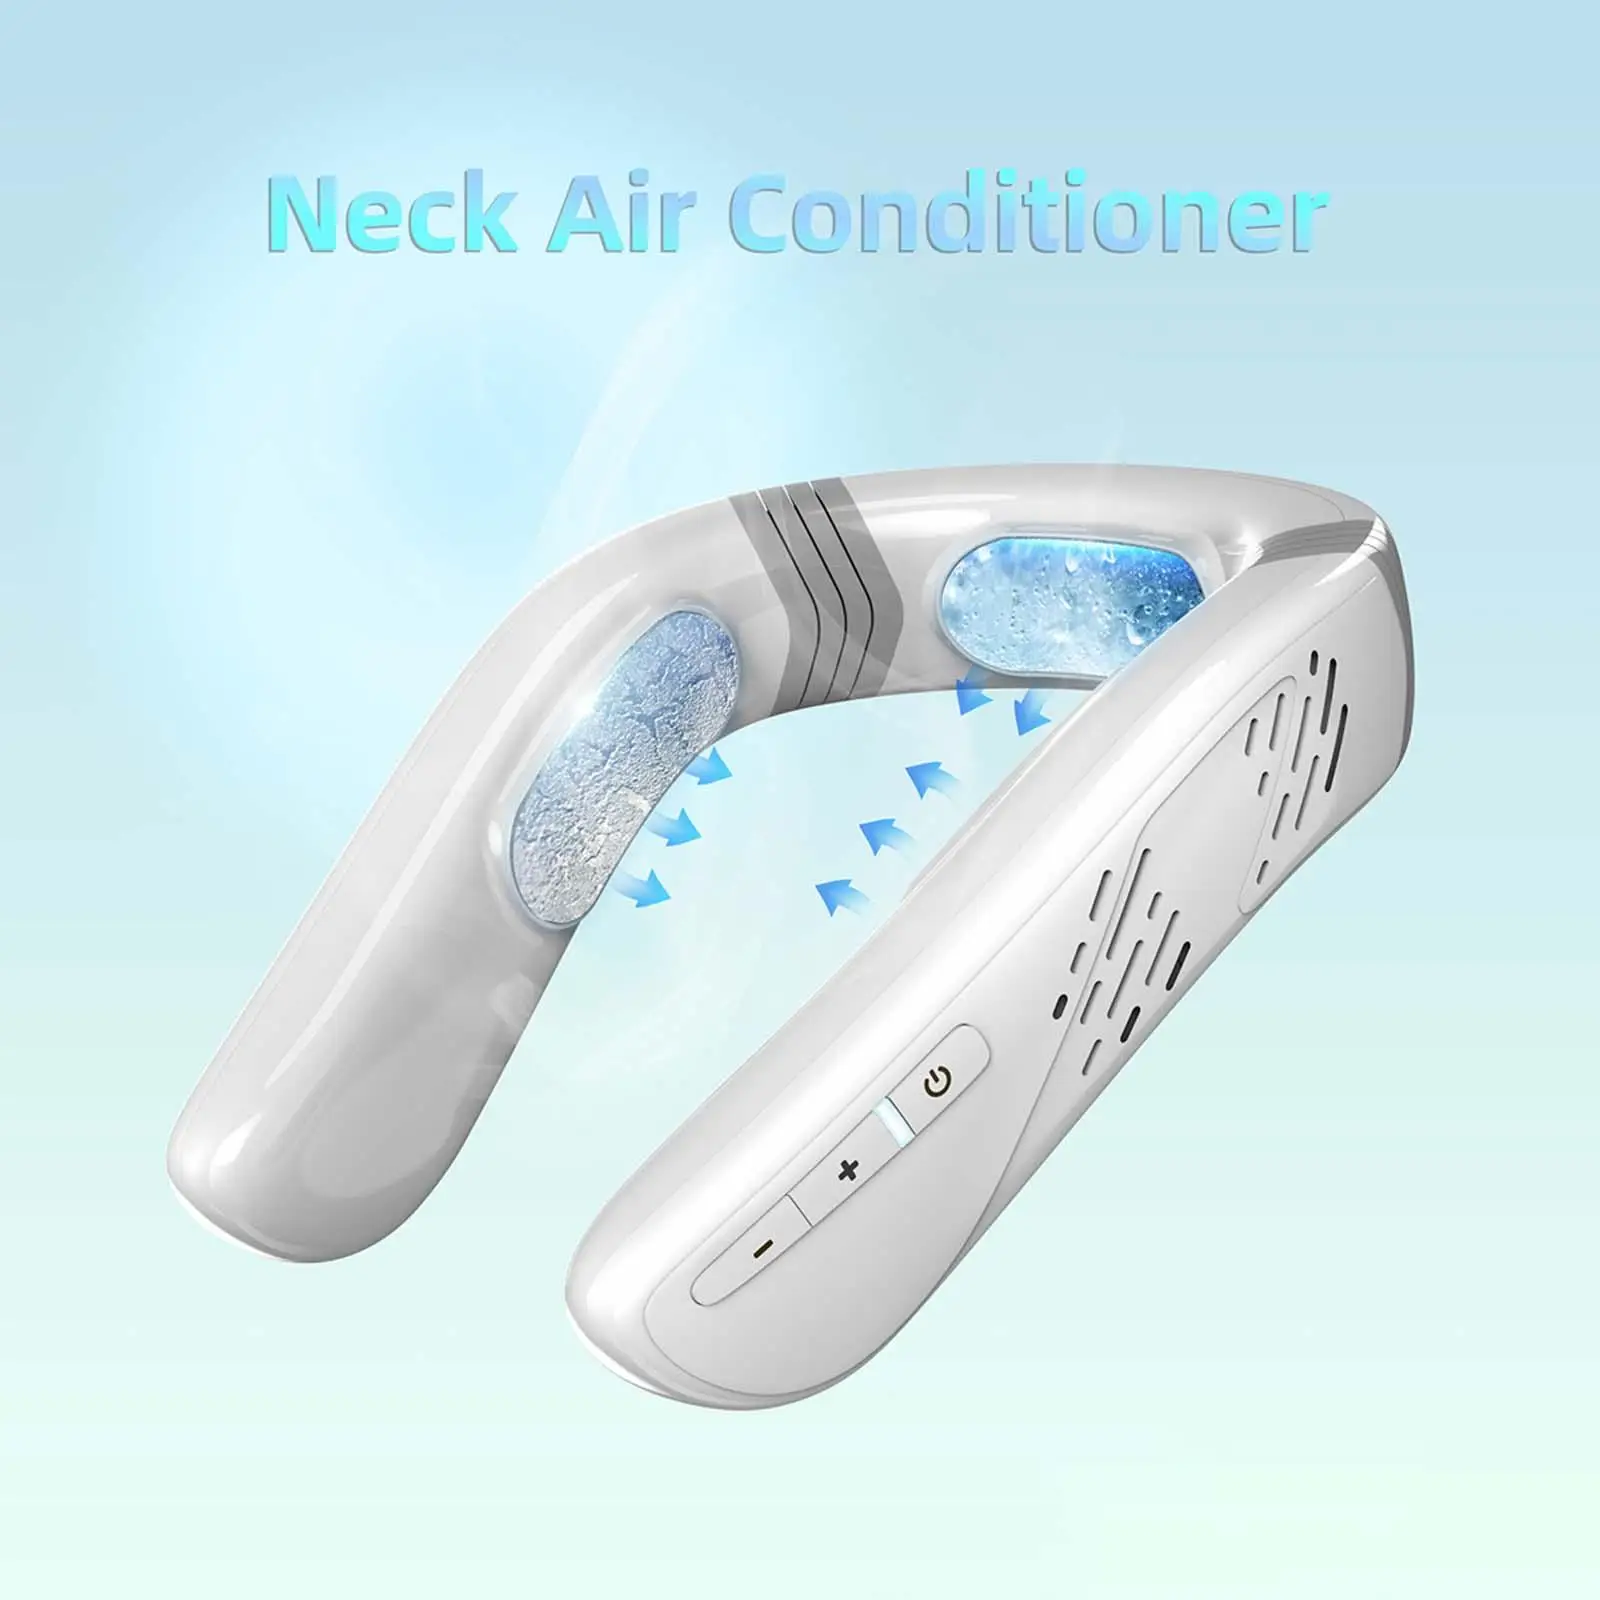 Hanging Conditioner, Around The Neck Conditioner Cooler for Home